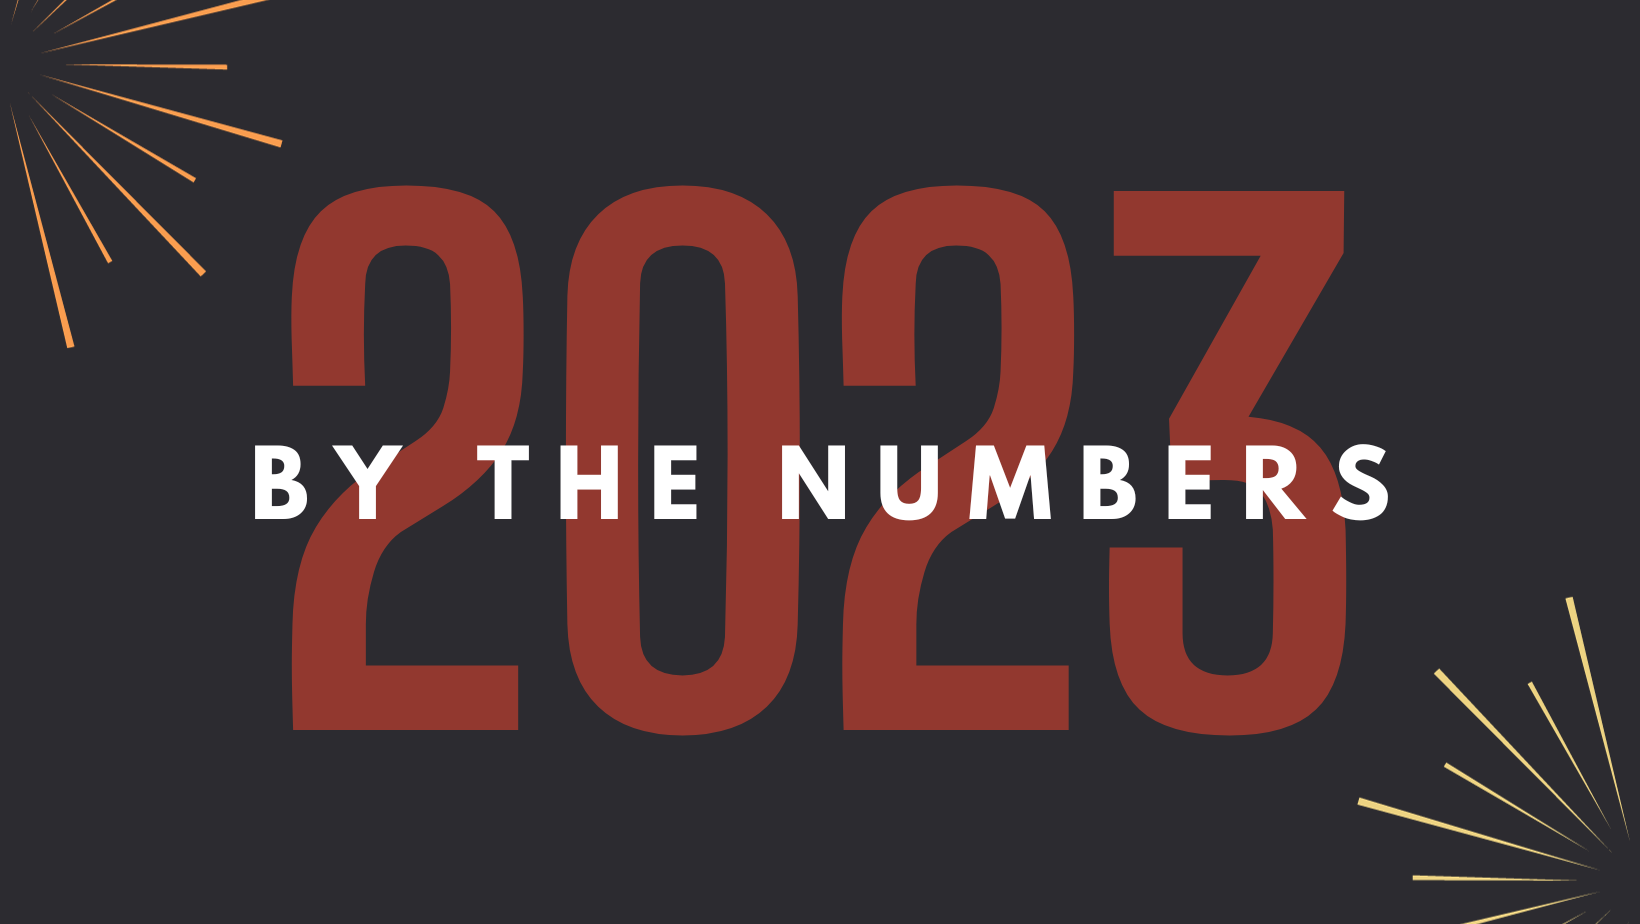 Black background with orange and yellow fireworks and text that reads "2023 By The Numbers"